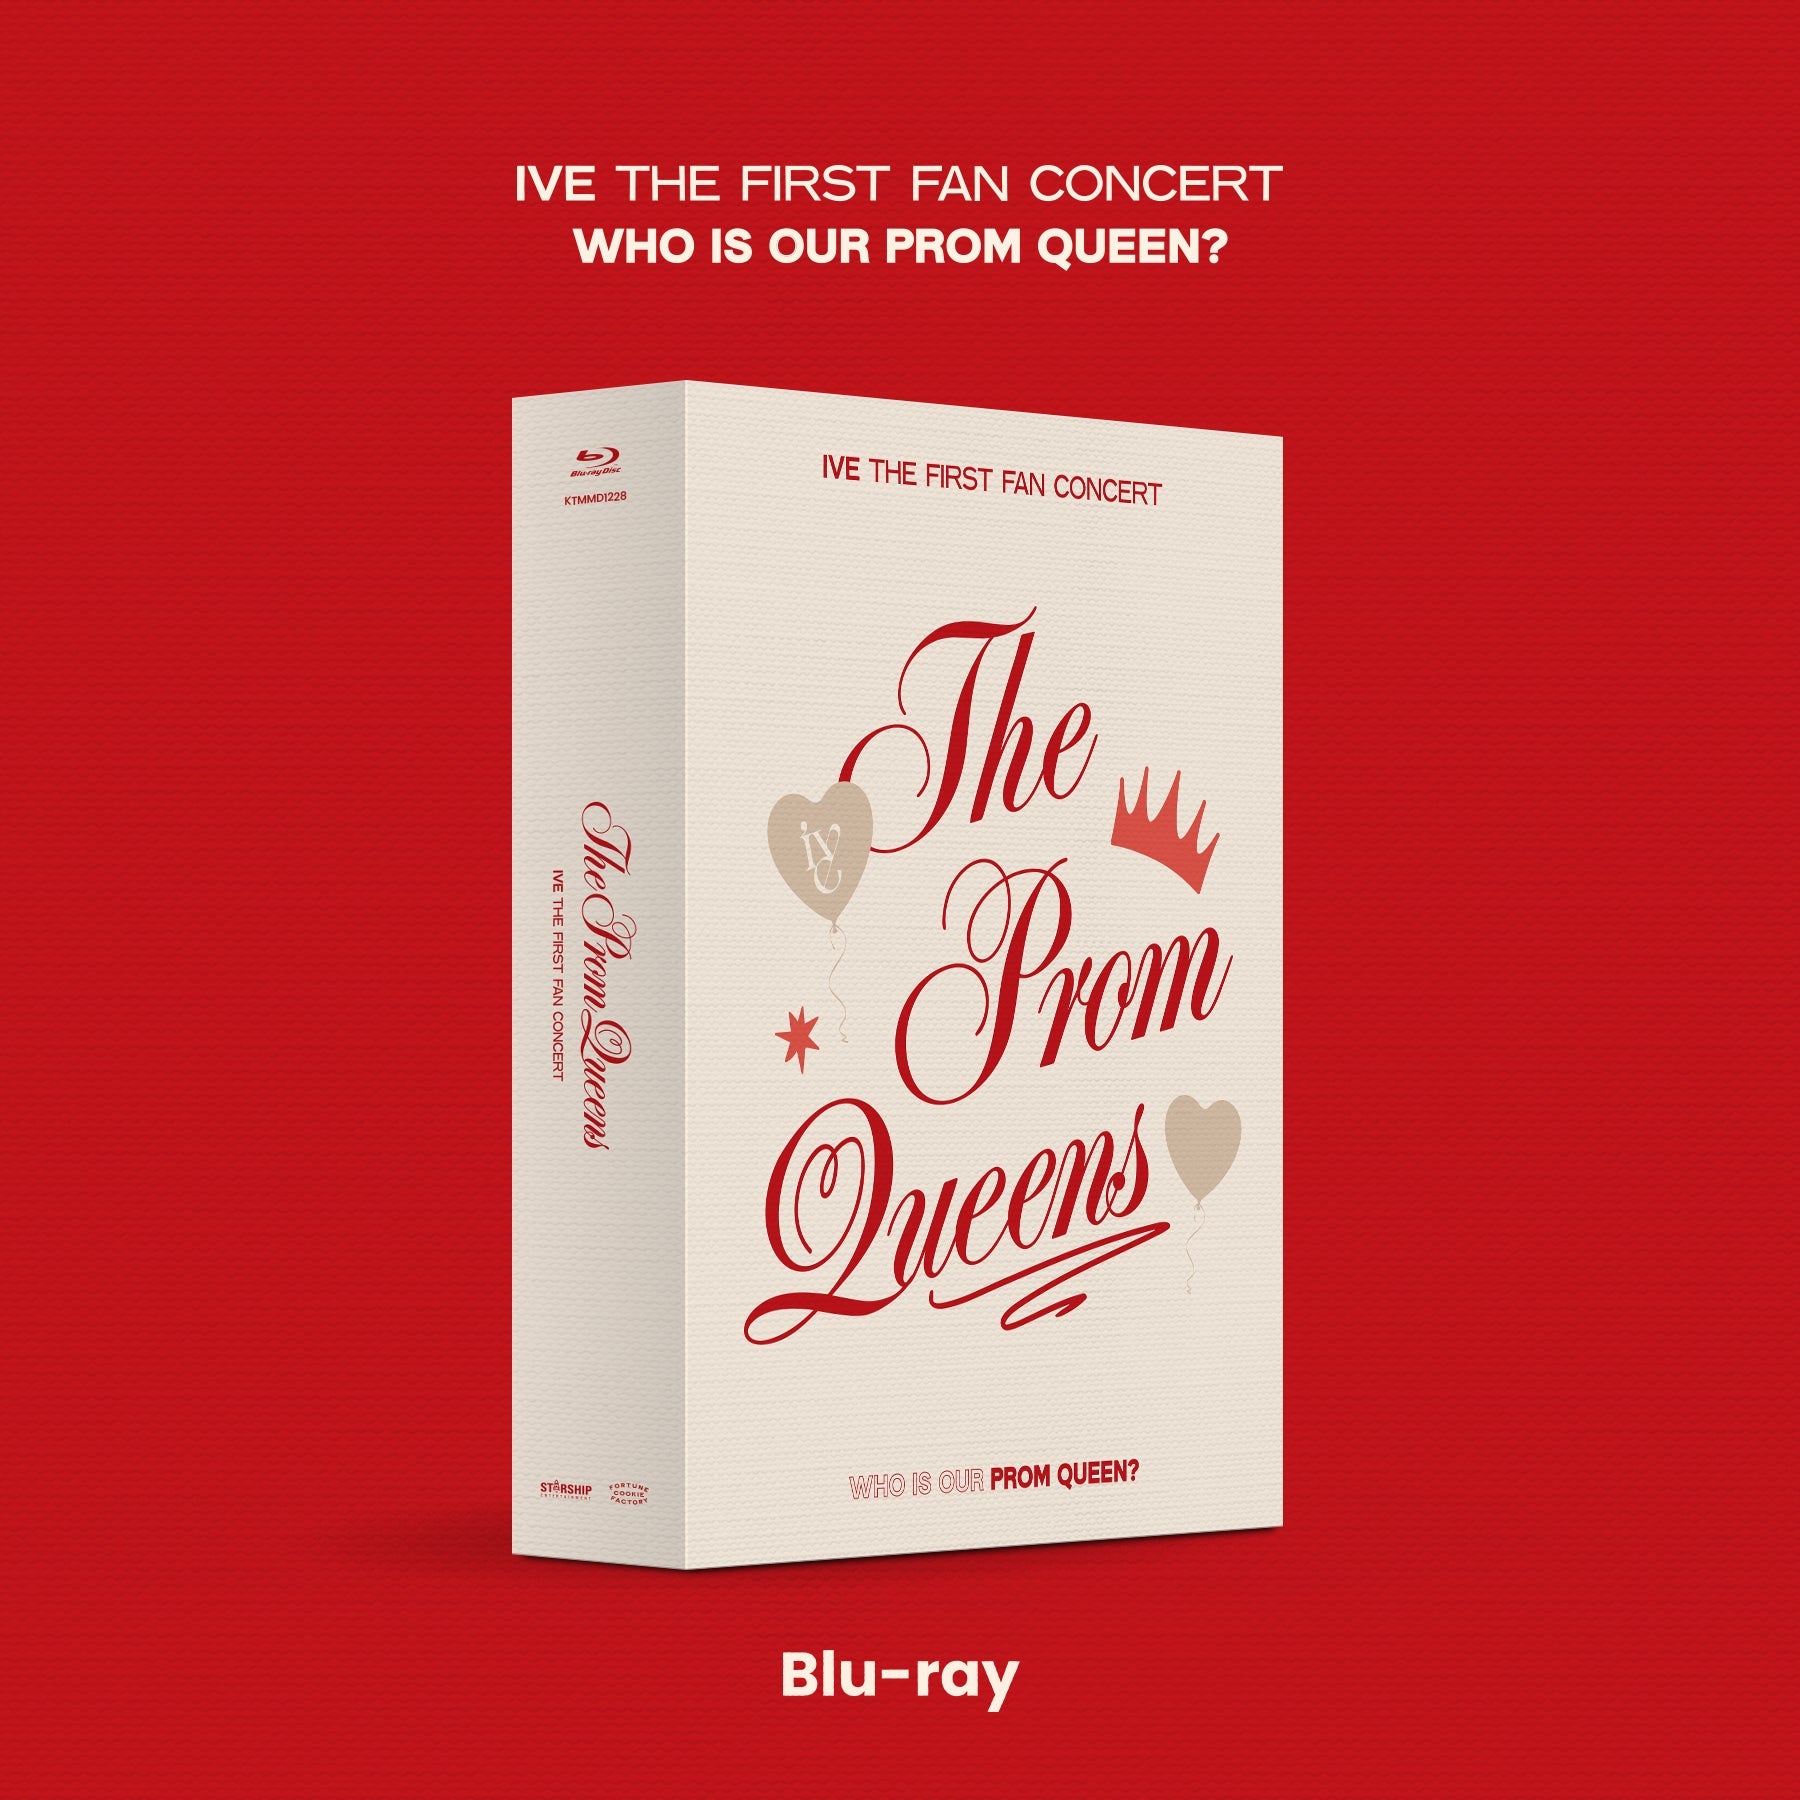 IVE THE FIRST FAN CONCERT 'THE PROM QUEENS' (BLU-RAY) COVER